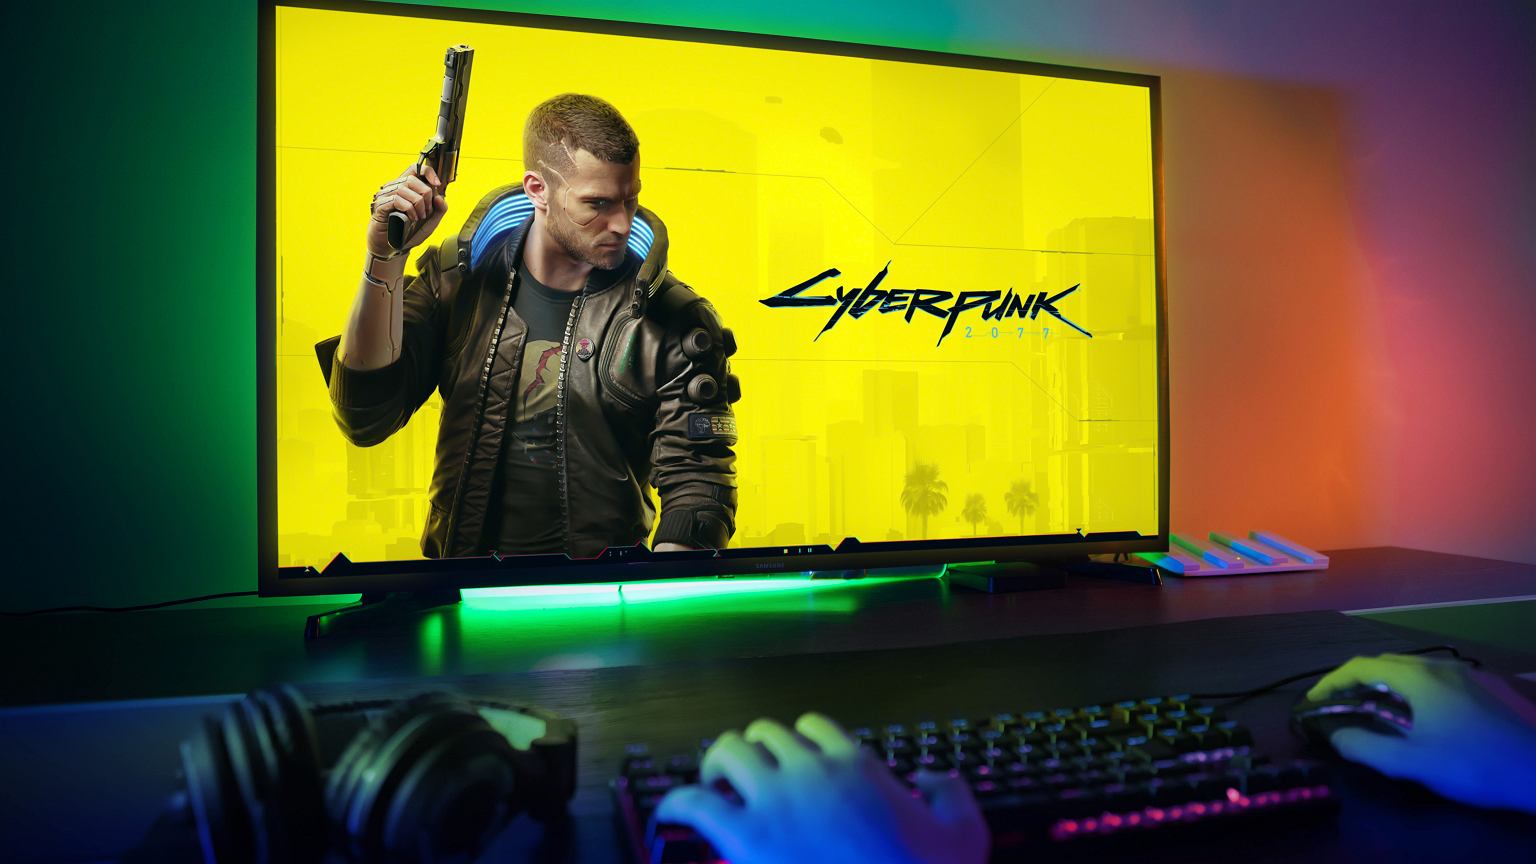 Wasn't Cyberpunk's failed start the developers' fault?  The blame was on the math testers